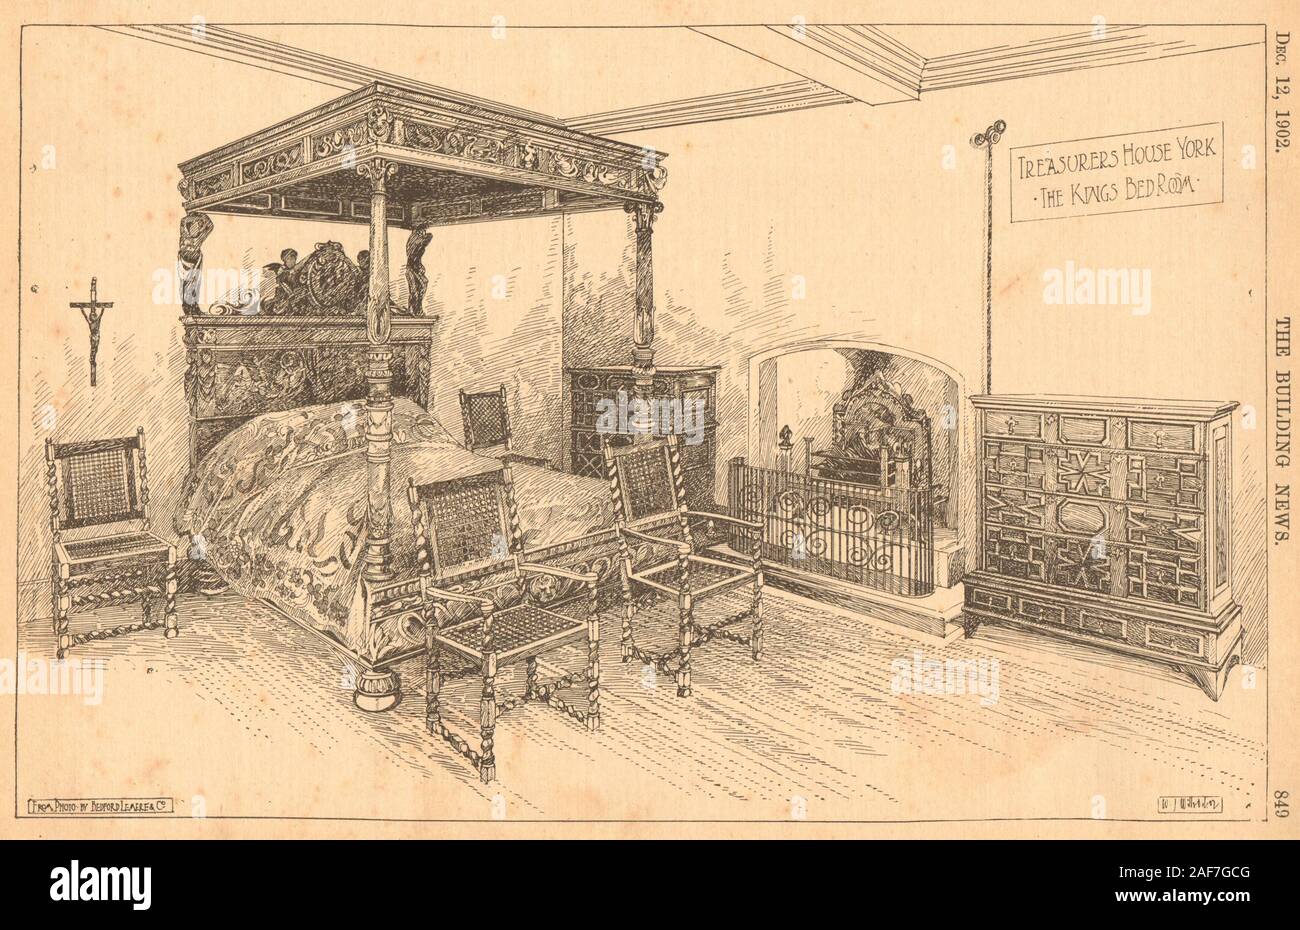 Treasurer's house, York, the King's bedroom, from photo by Bedford Lemere 1902 Stock Photo